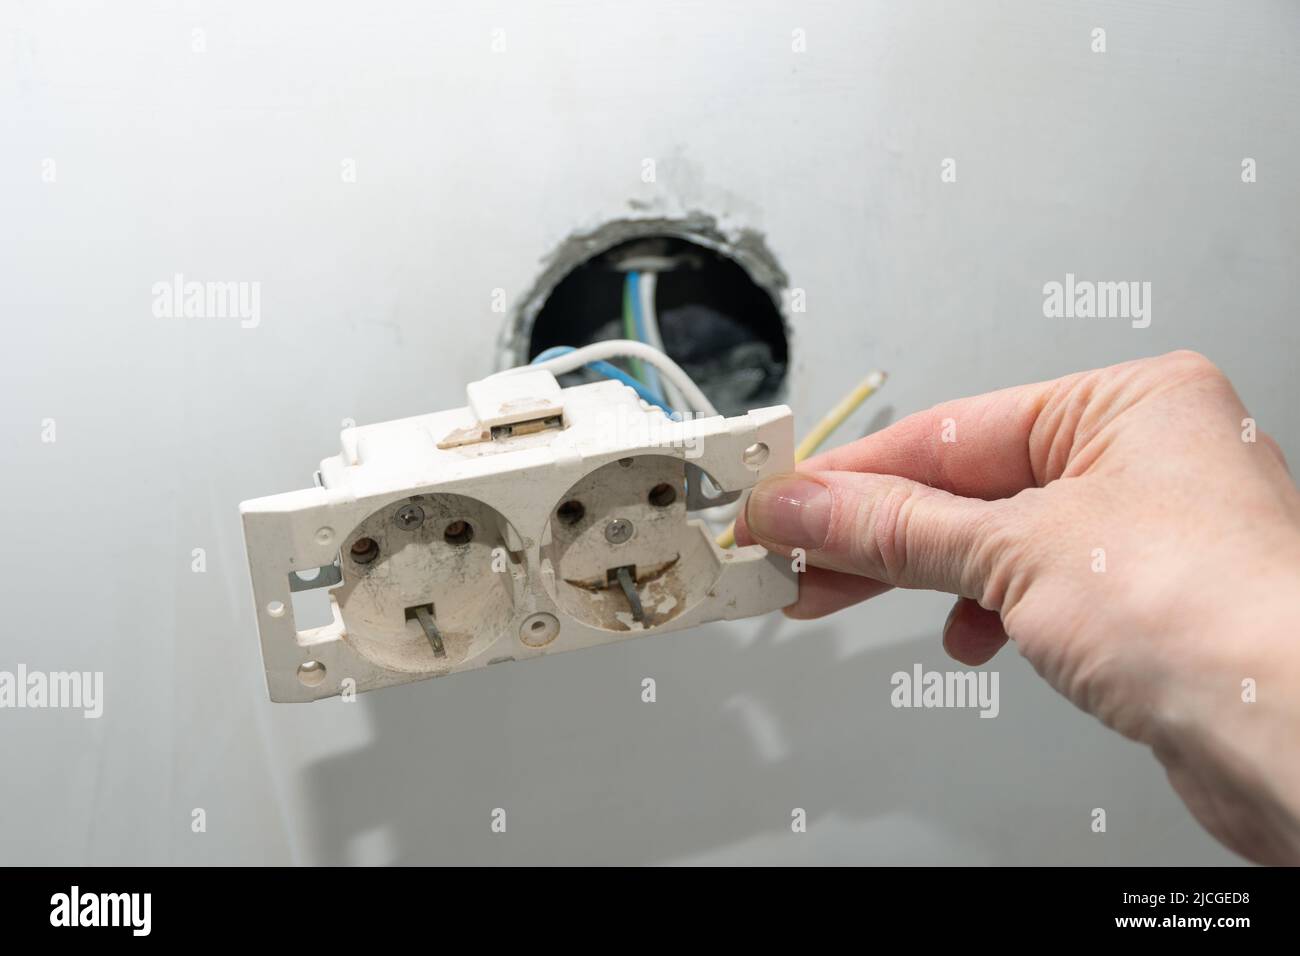 Installation of new electrical wiring, plastic socket and electric wires for future sockets on a plastered wall. Hand installing a new socket. DIY hou Stock Photo